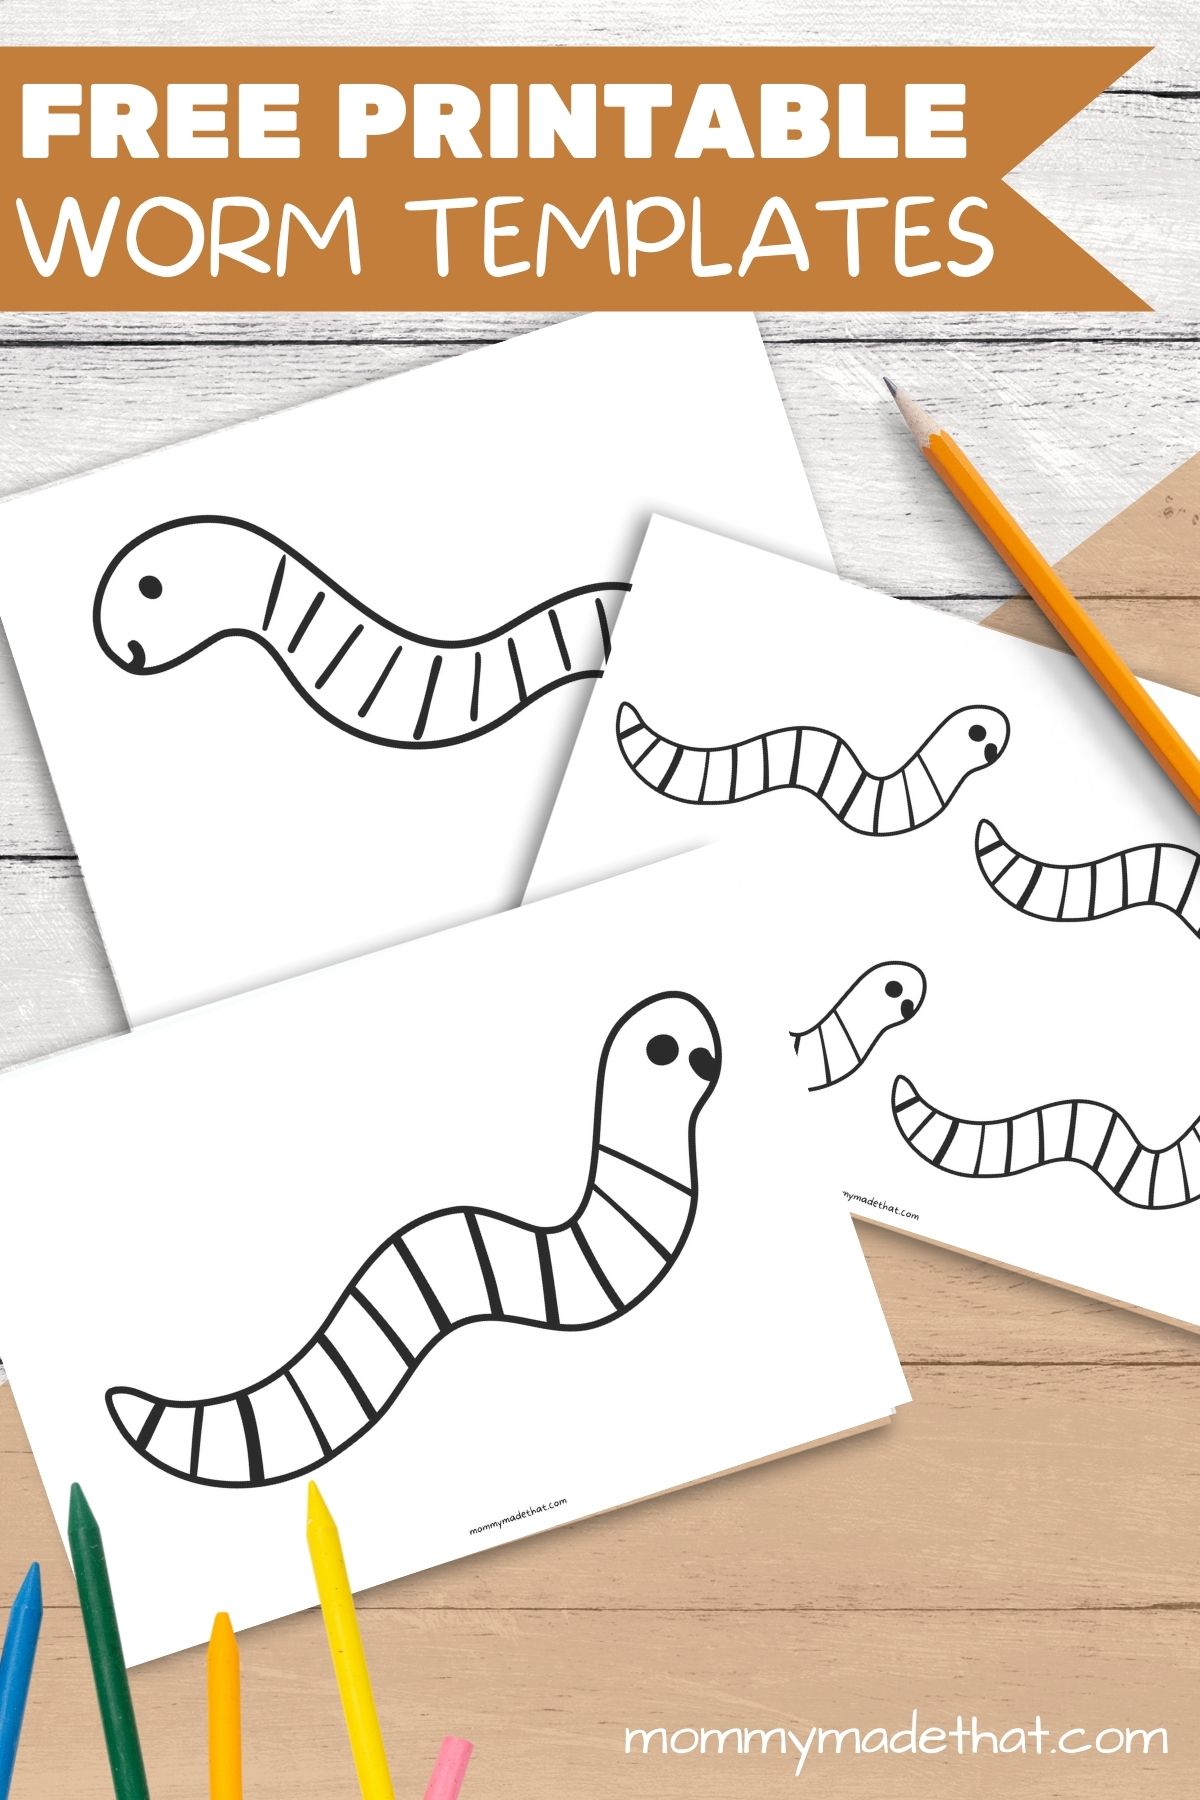 Super cute free worm templates and outline printables